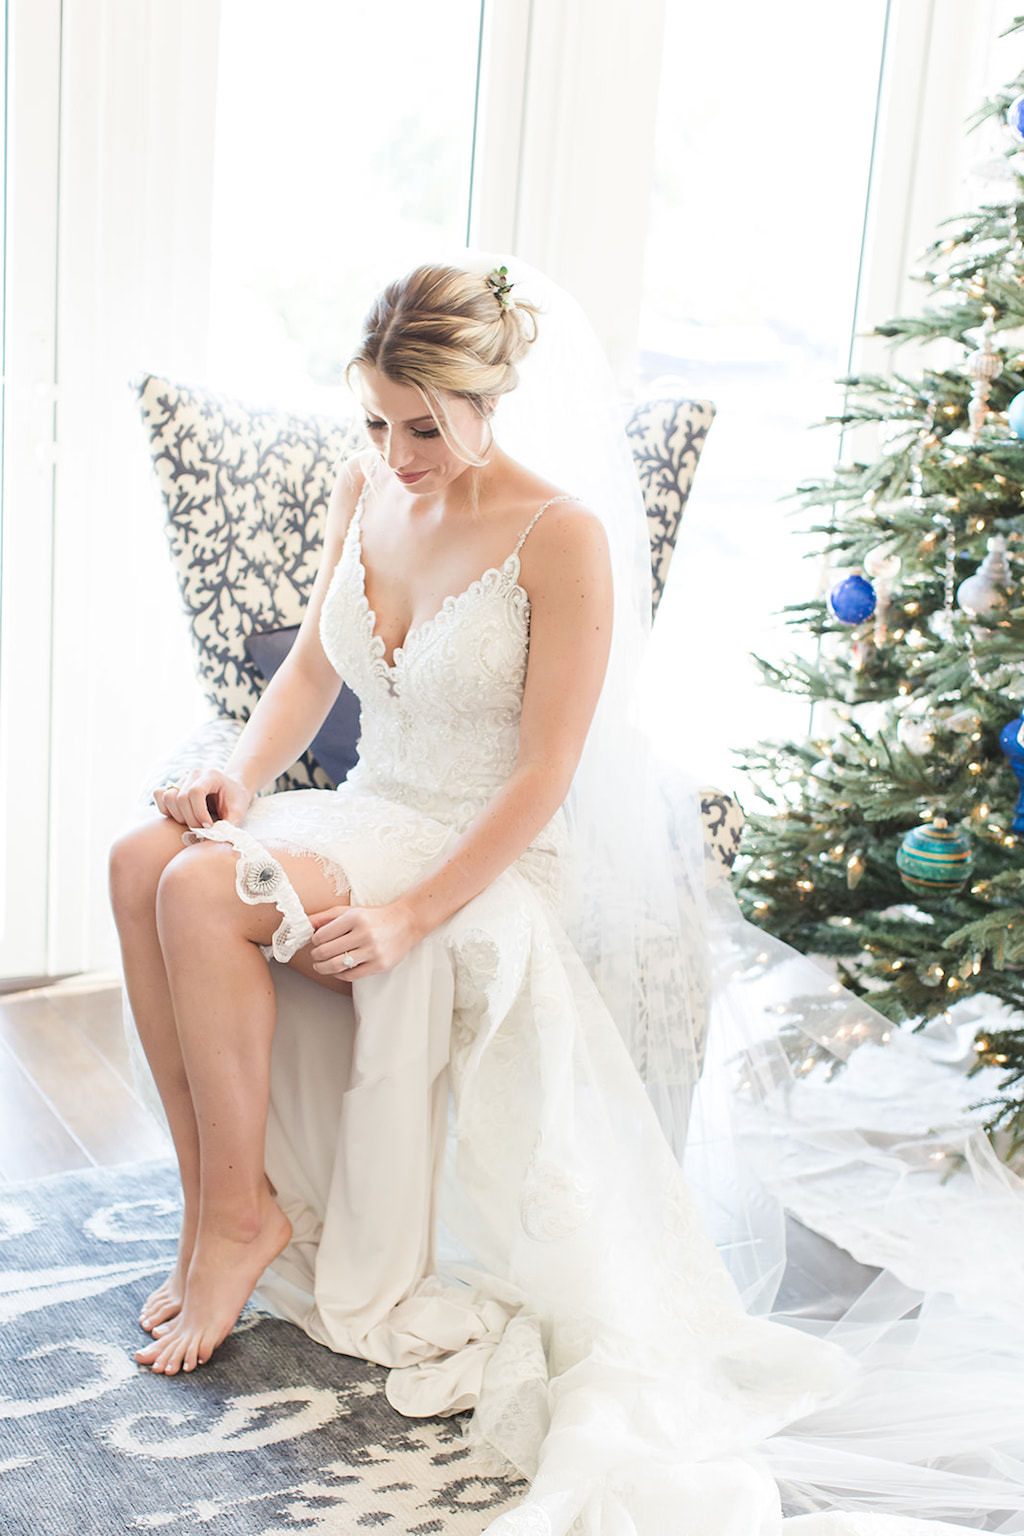 Florida Bride Getting Ready Photo in Allure Wedding Dress, Pulling Up Lace Garter, Christmas | Tampa Bay Wedding Photographers Shauna and Jordon Photography